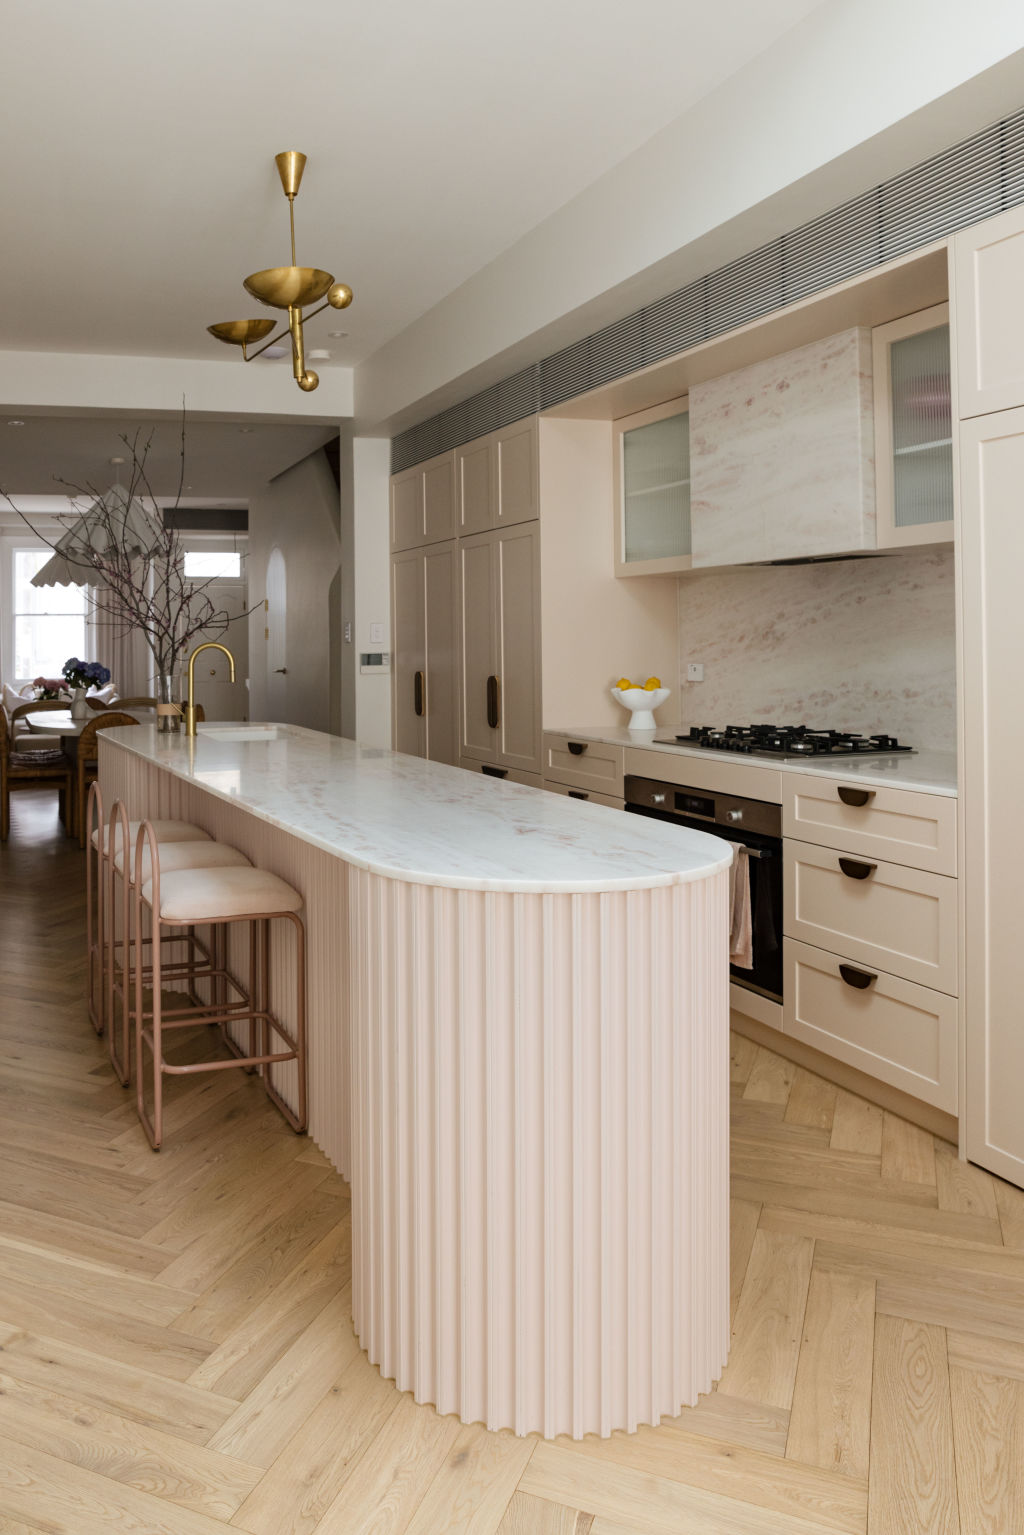 The undisputed star of the home is the playfully curvaceous and perfectly pink, marble-swathed kitchen. Photo: Supplied